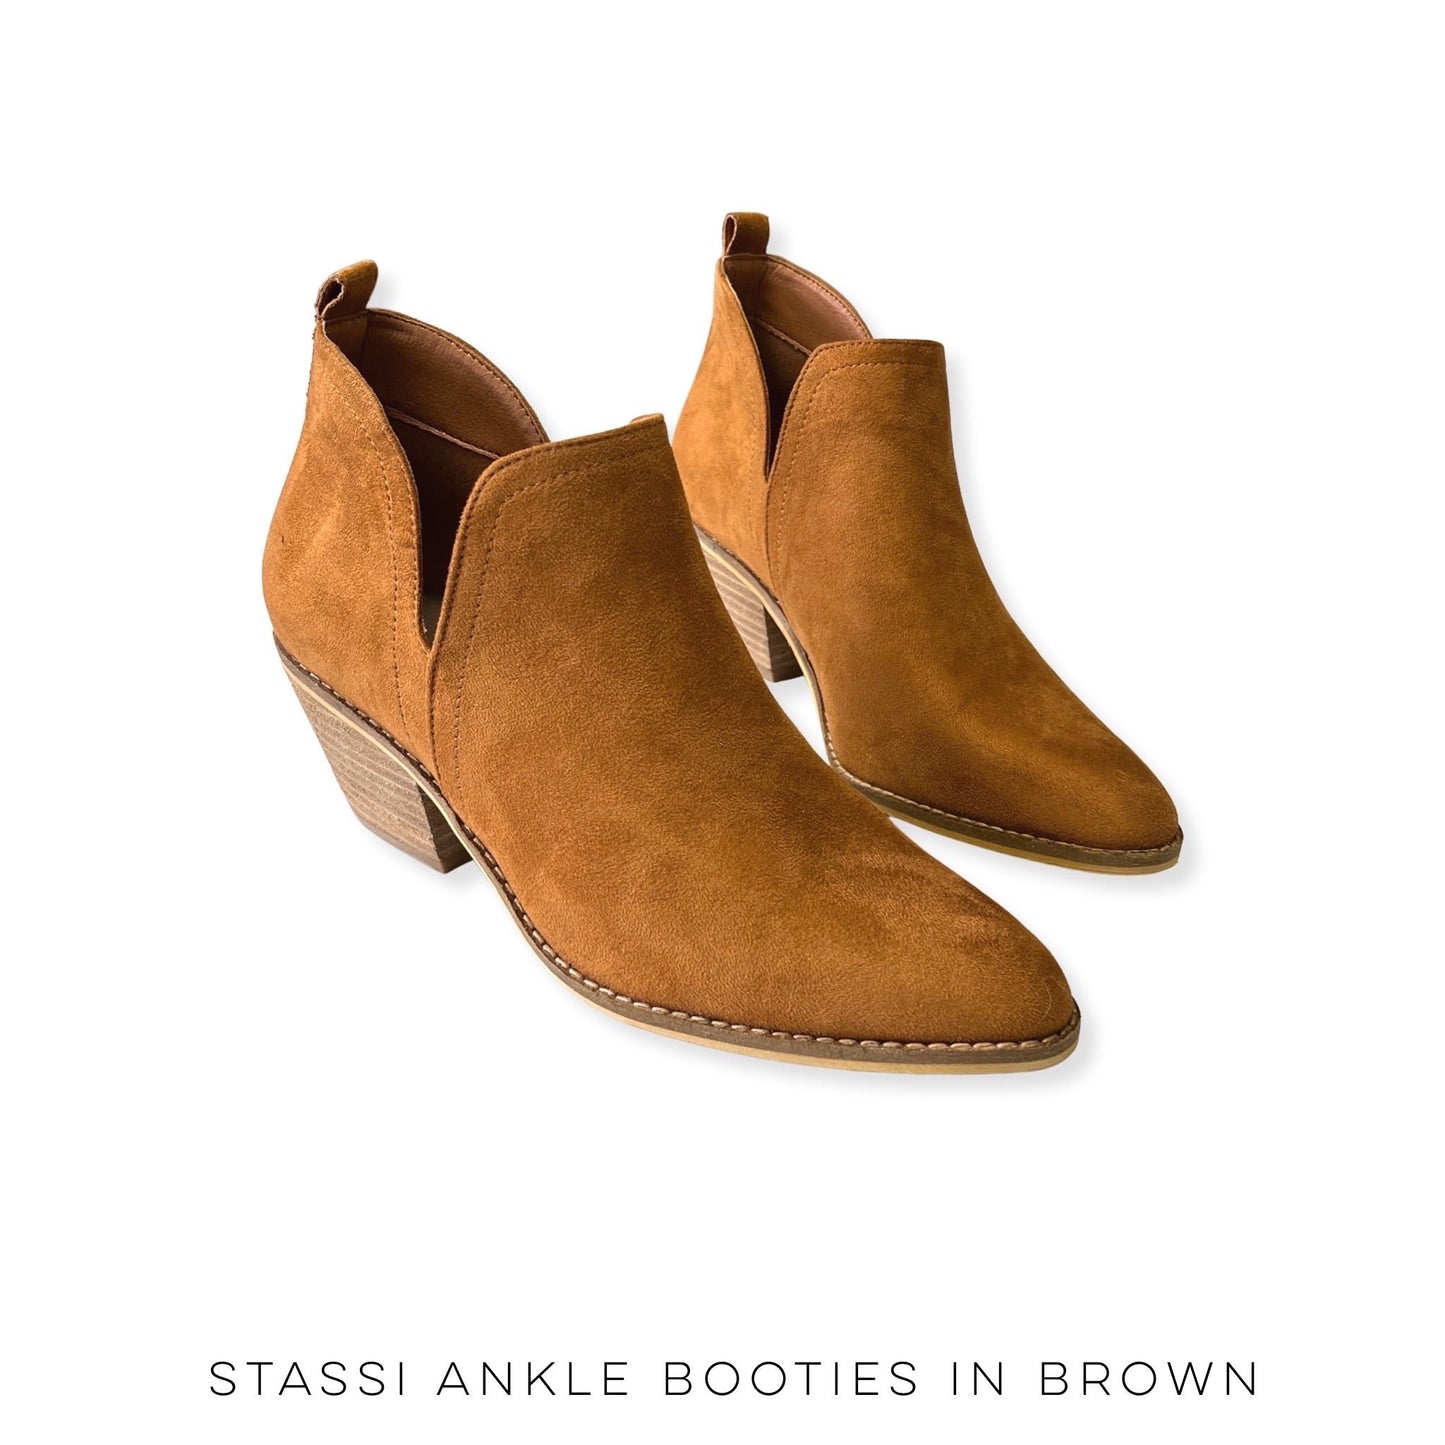 Stassi Ankle Booties in Brown